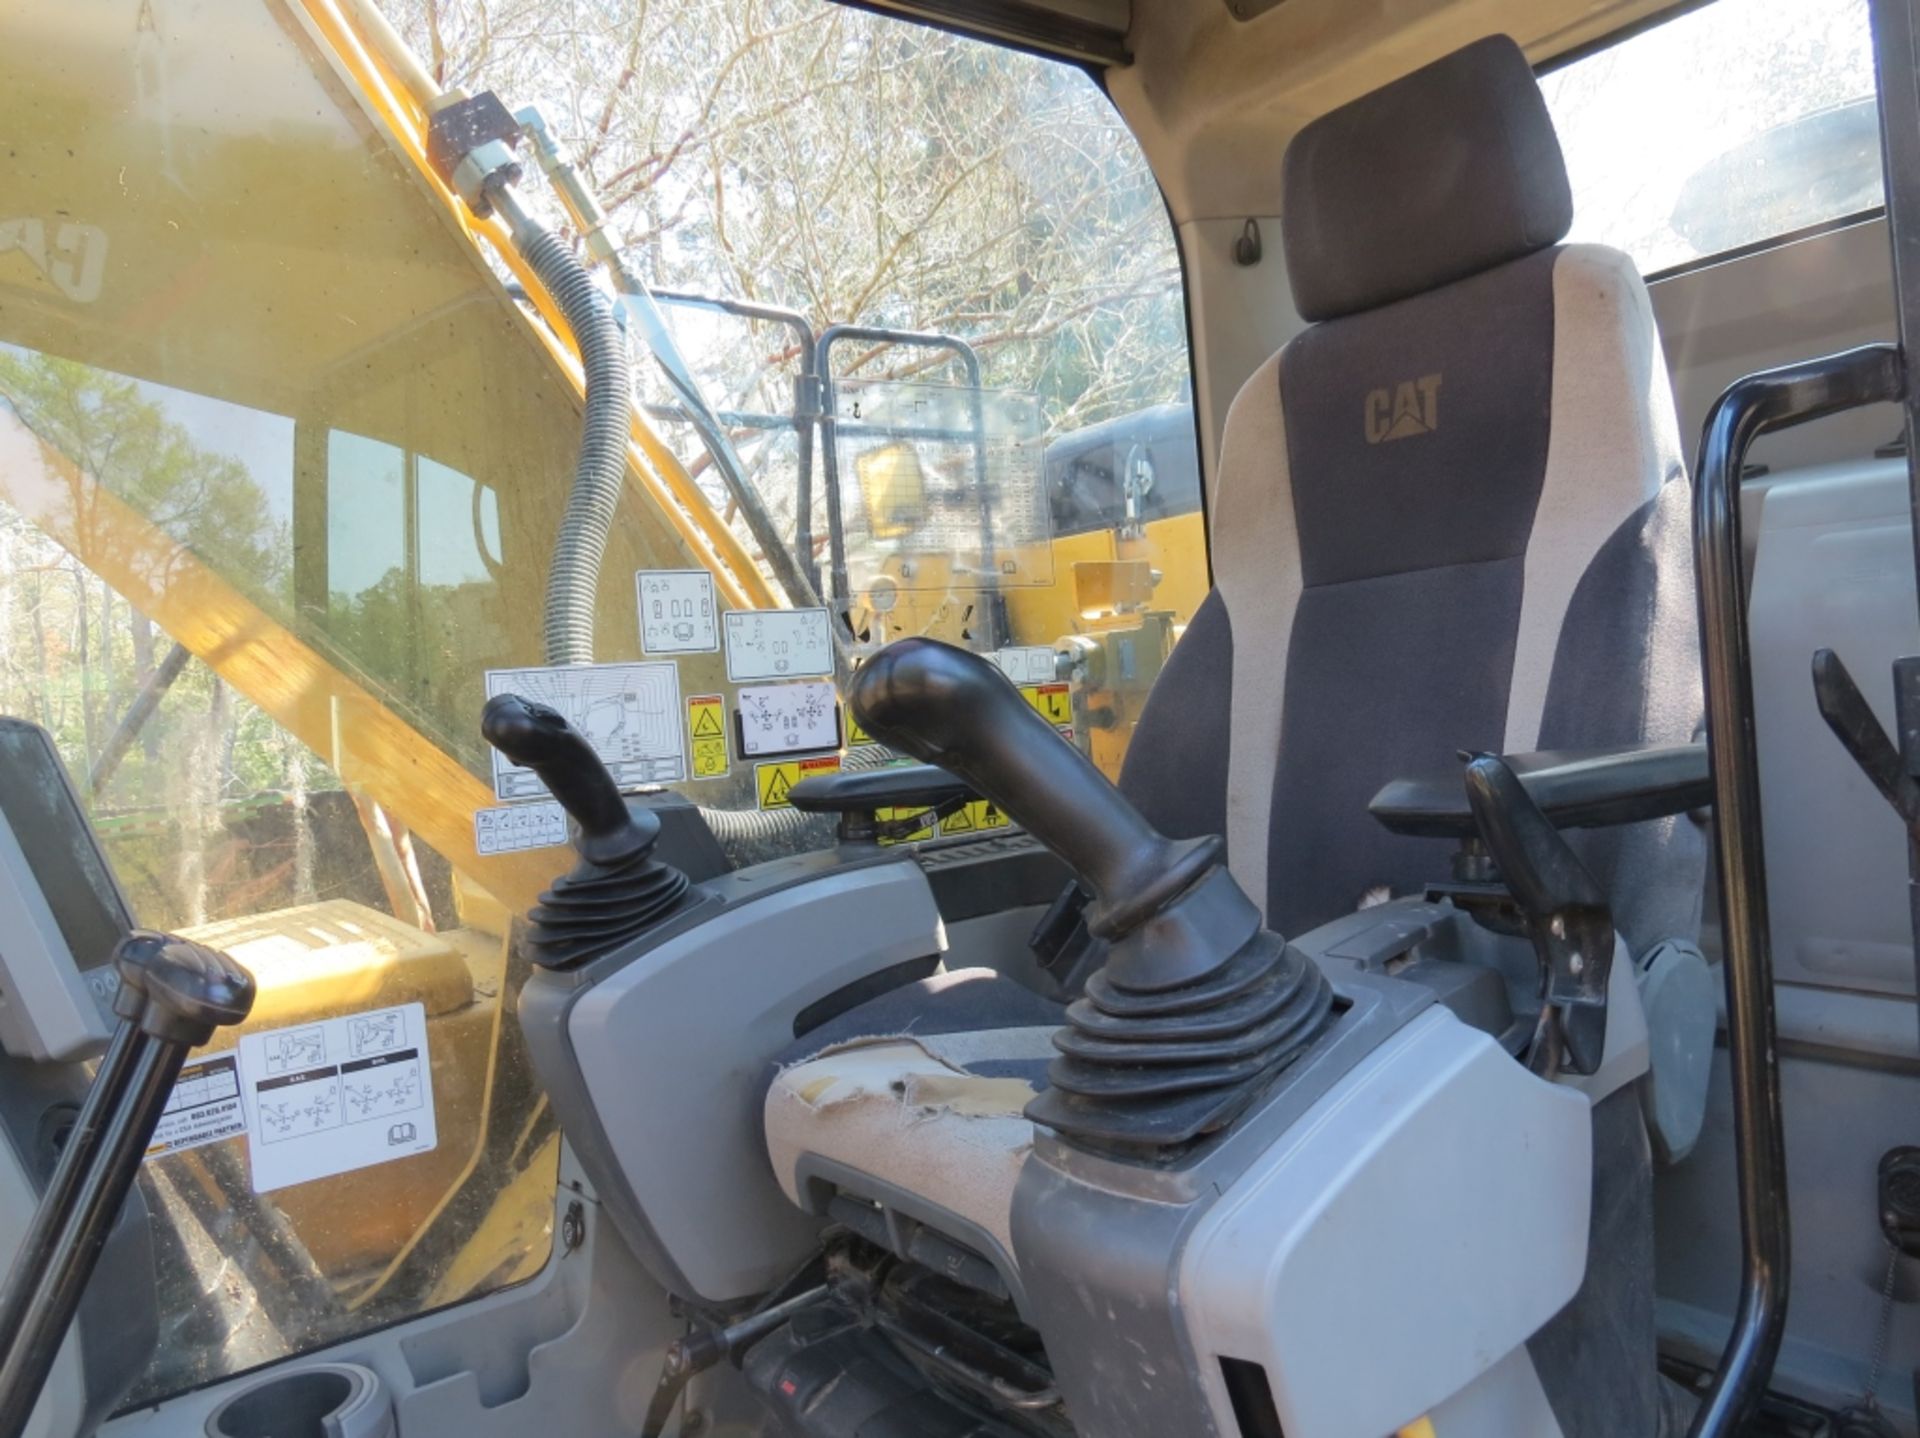 2017 CAT 326FL Excavator Cab A/C 48" Bucket & CAT Thumb 6334 hours showing Auxillary Hydraulics S/N: - Image 14 of 23